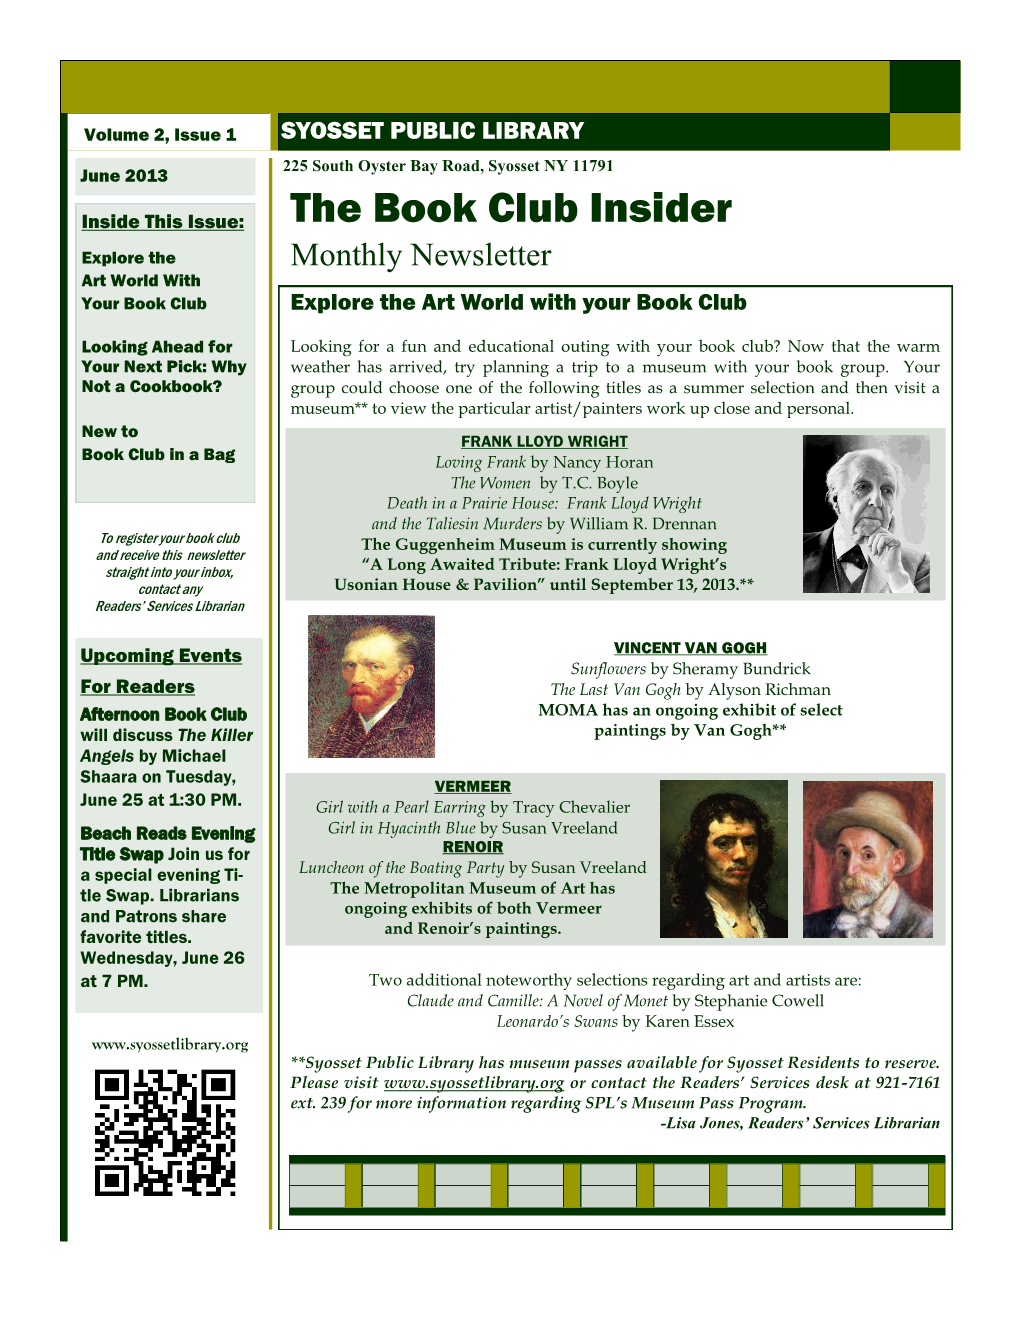 The Book Club Insider Explore the Monthly Newsletter Art World with Your Book Club Explore the Art World with Your Book Club